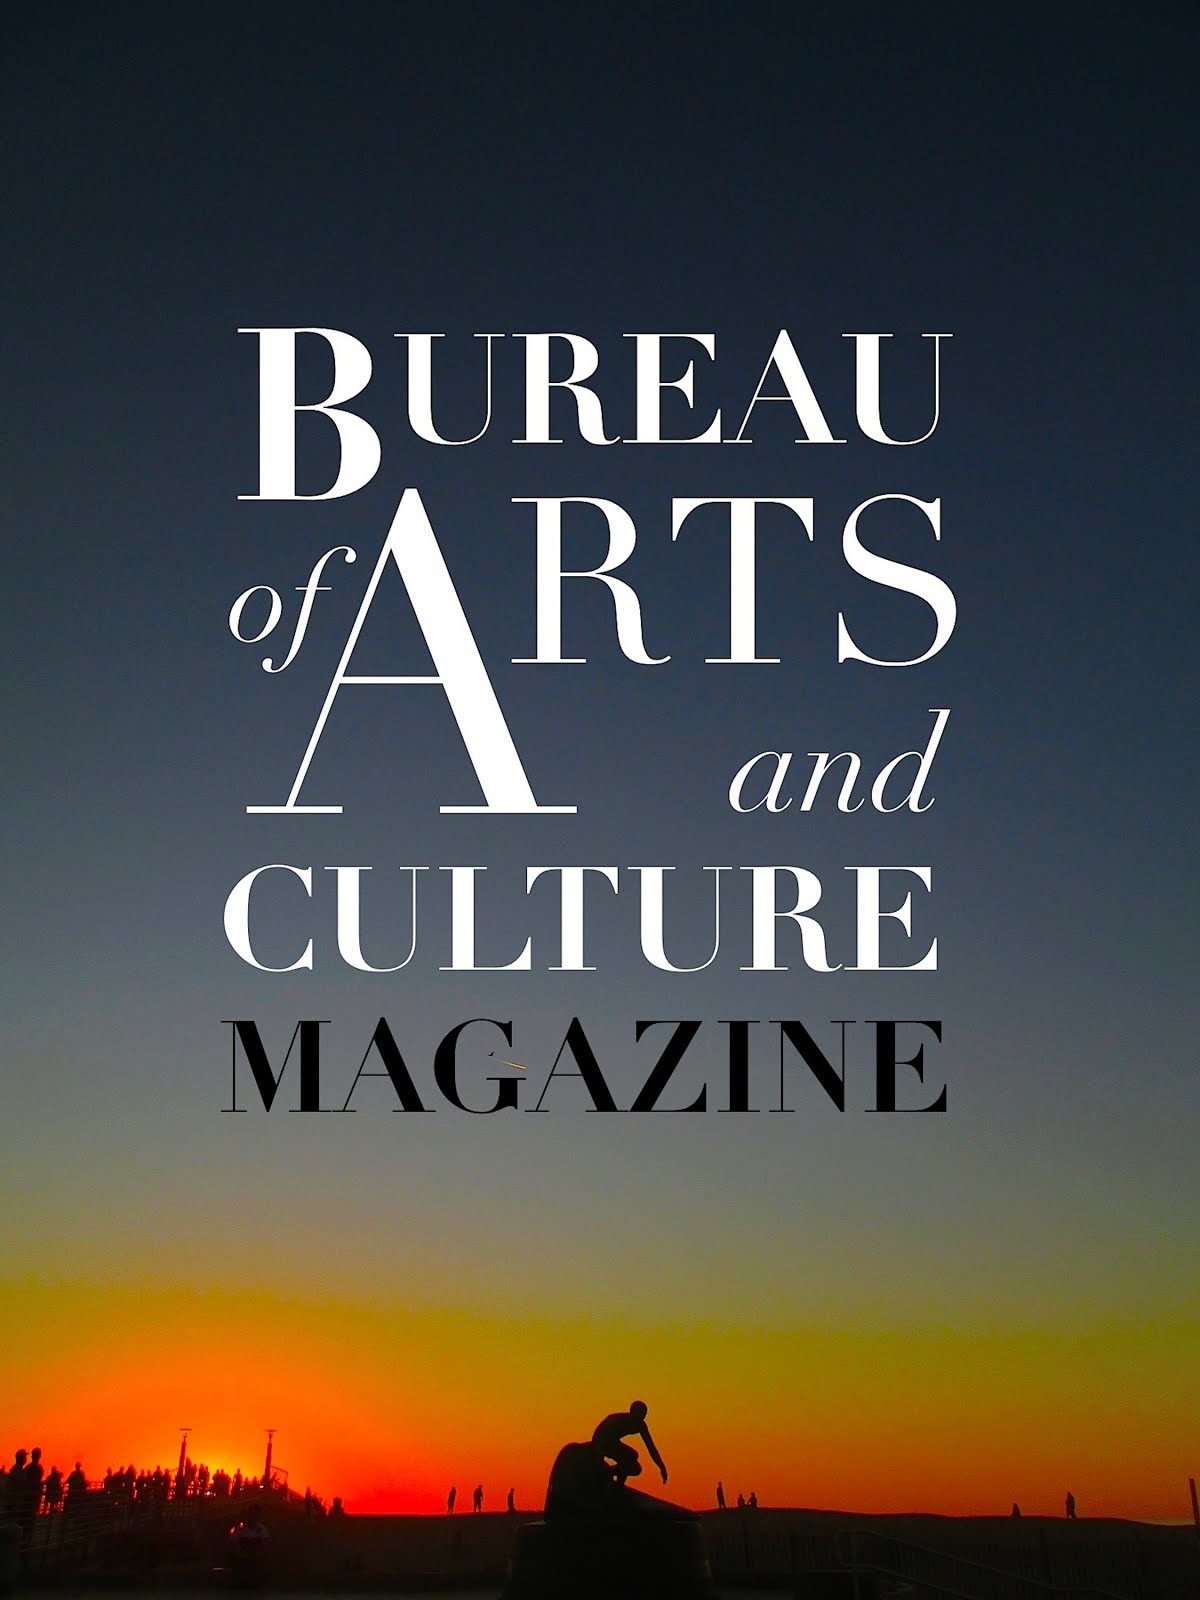 GET FREE BACK EDITIONS Of BUREAU MAGAZINES NOW